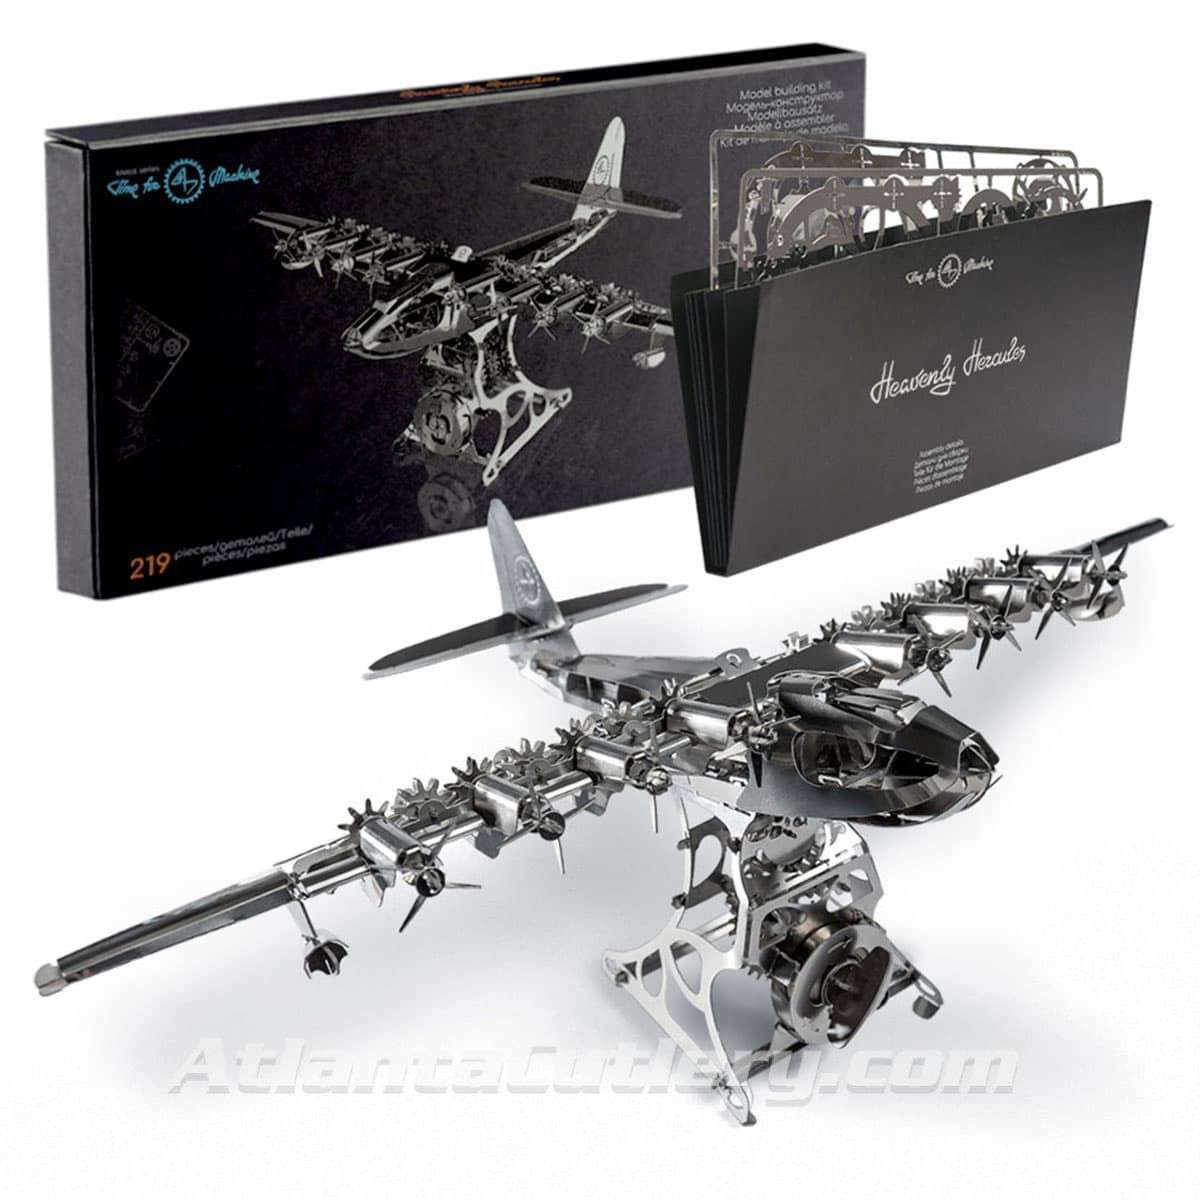 polished stainless steel model kit of Hercules H-4 with moving propellers and a display stand